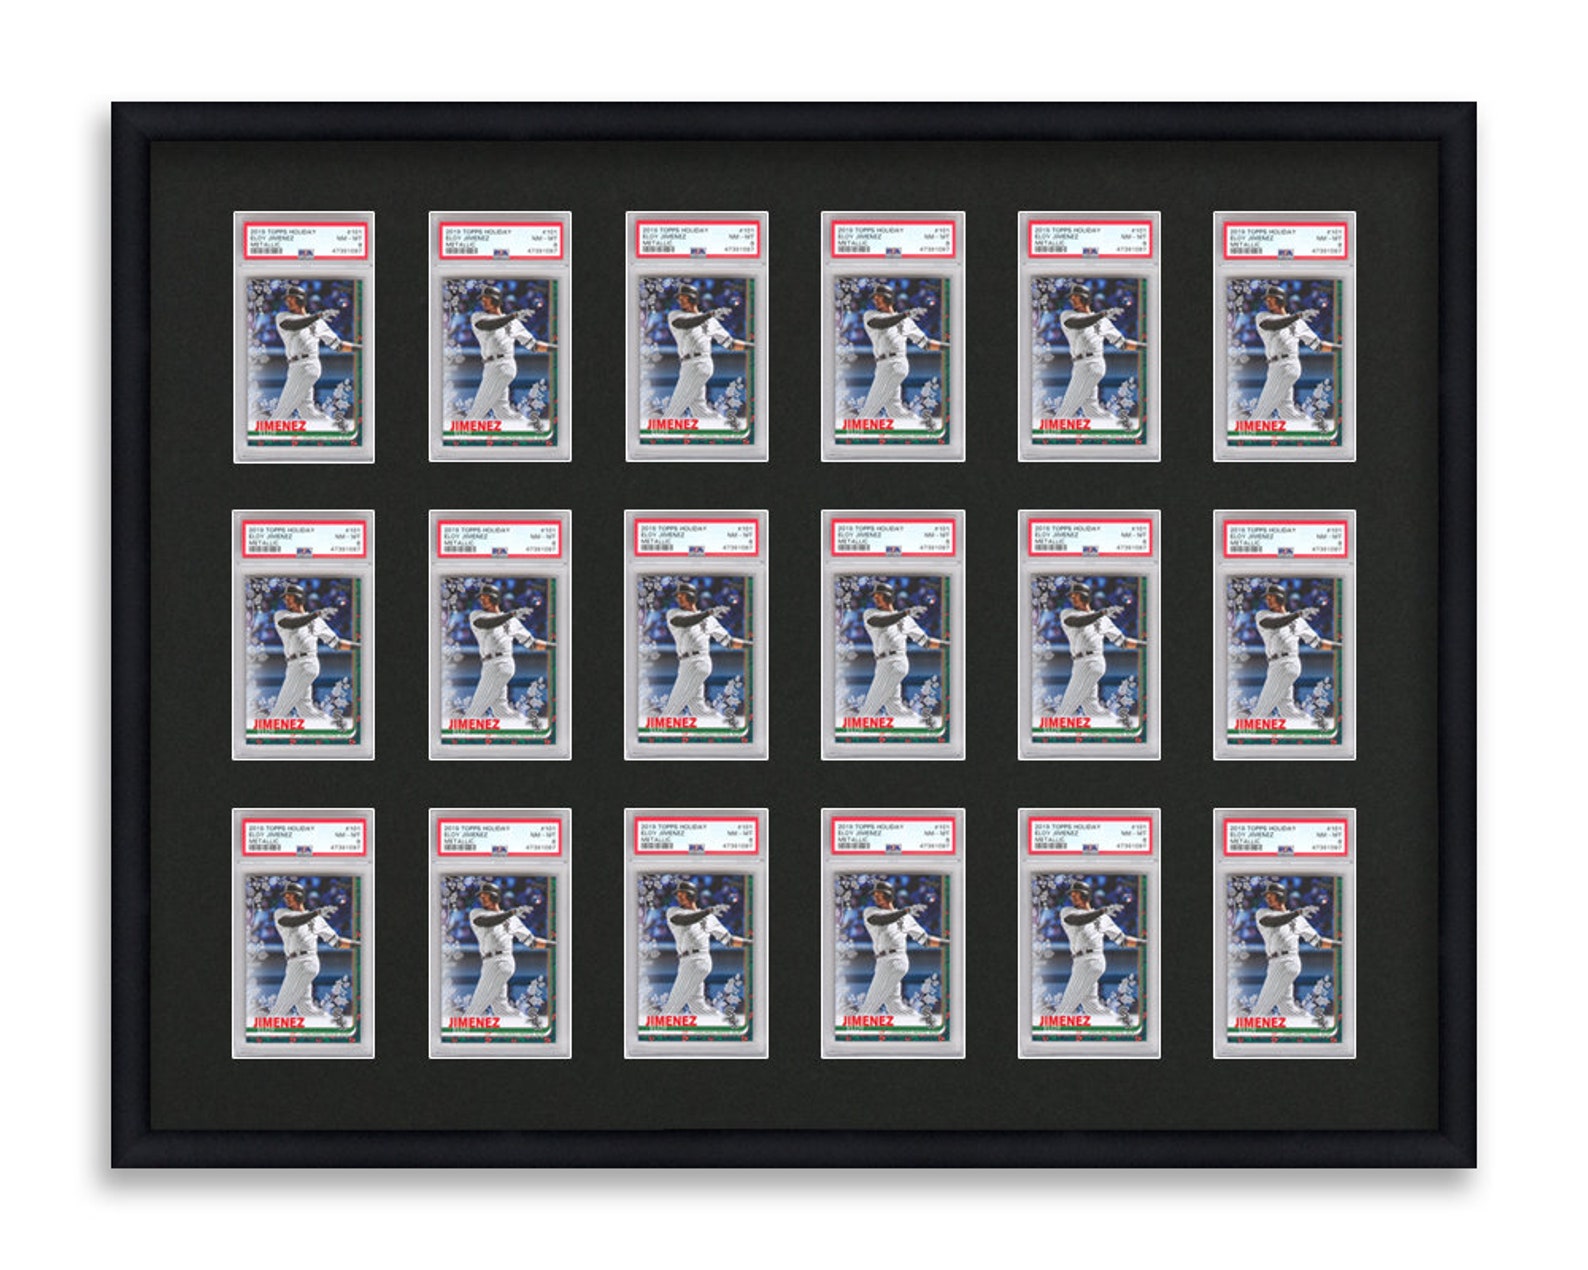 Psa Graded Card Frame Display 18 Opening Frame Fitted For 18 Etsy